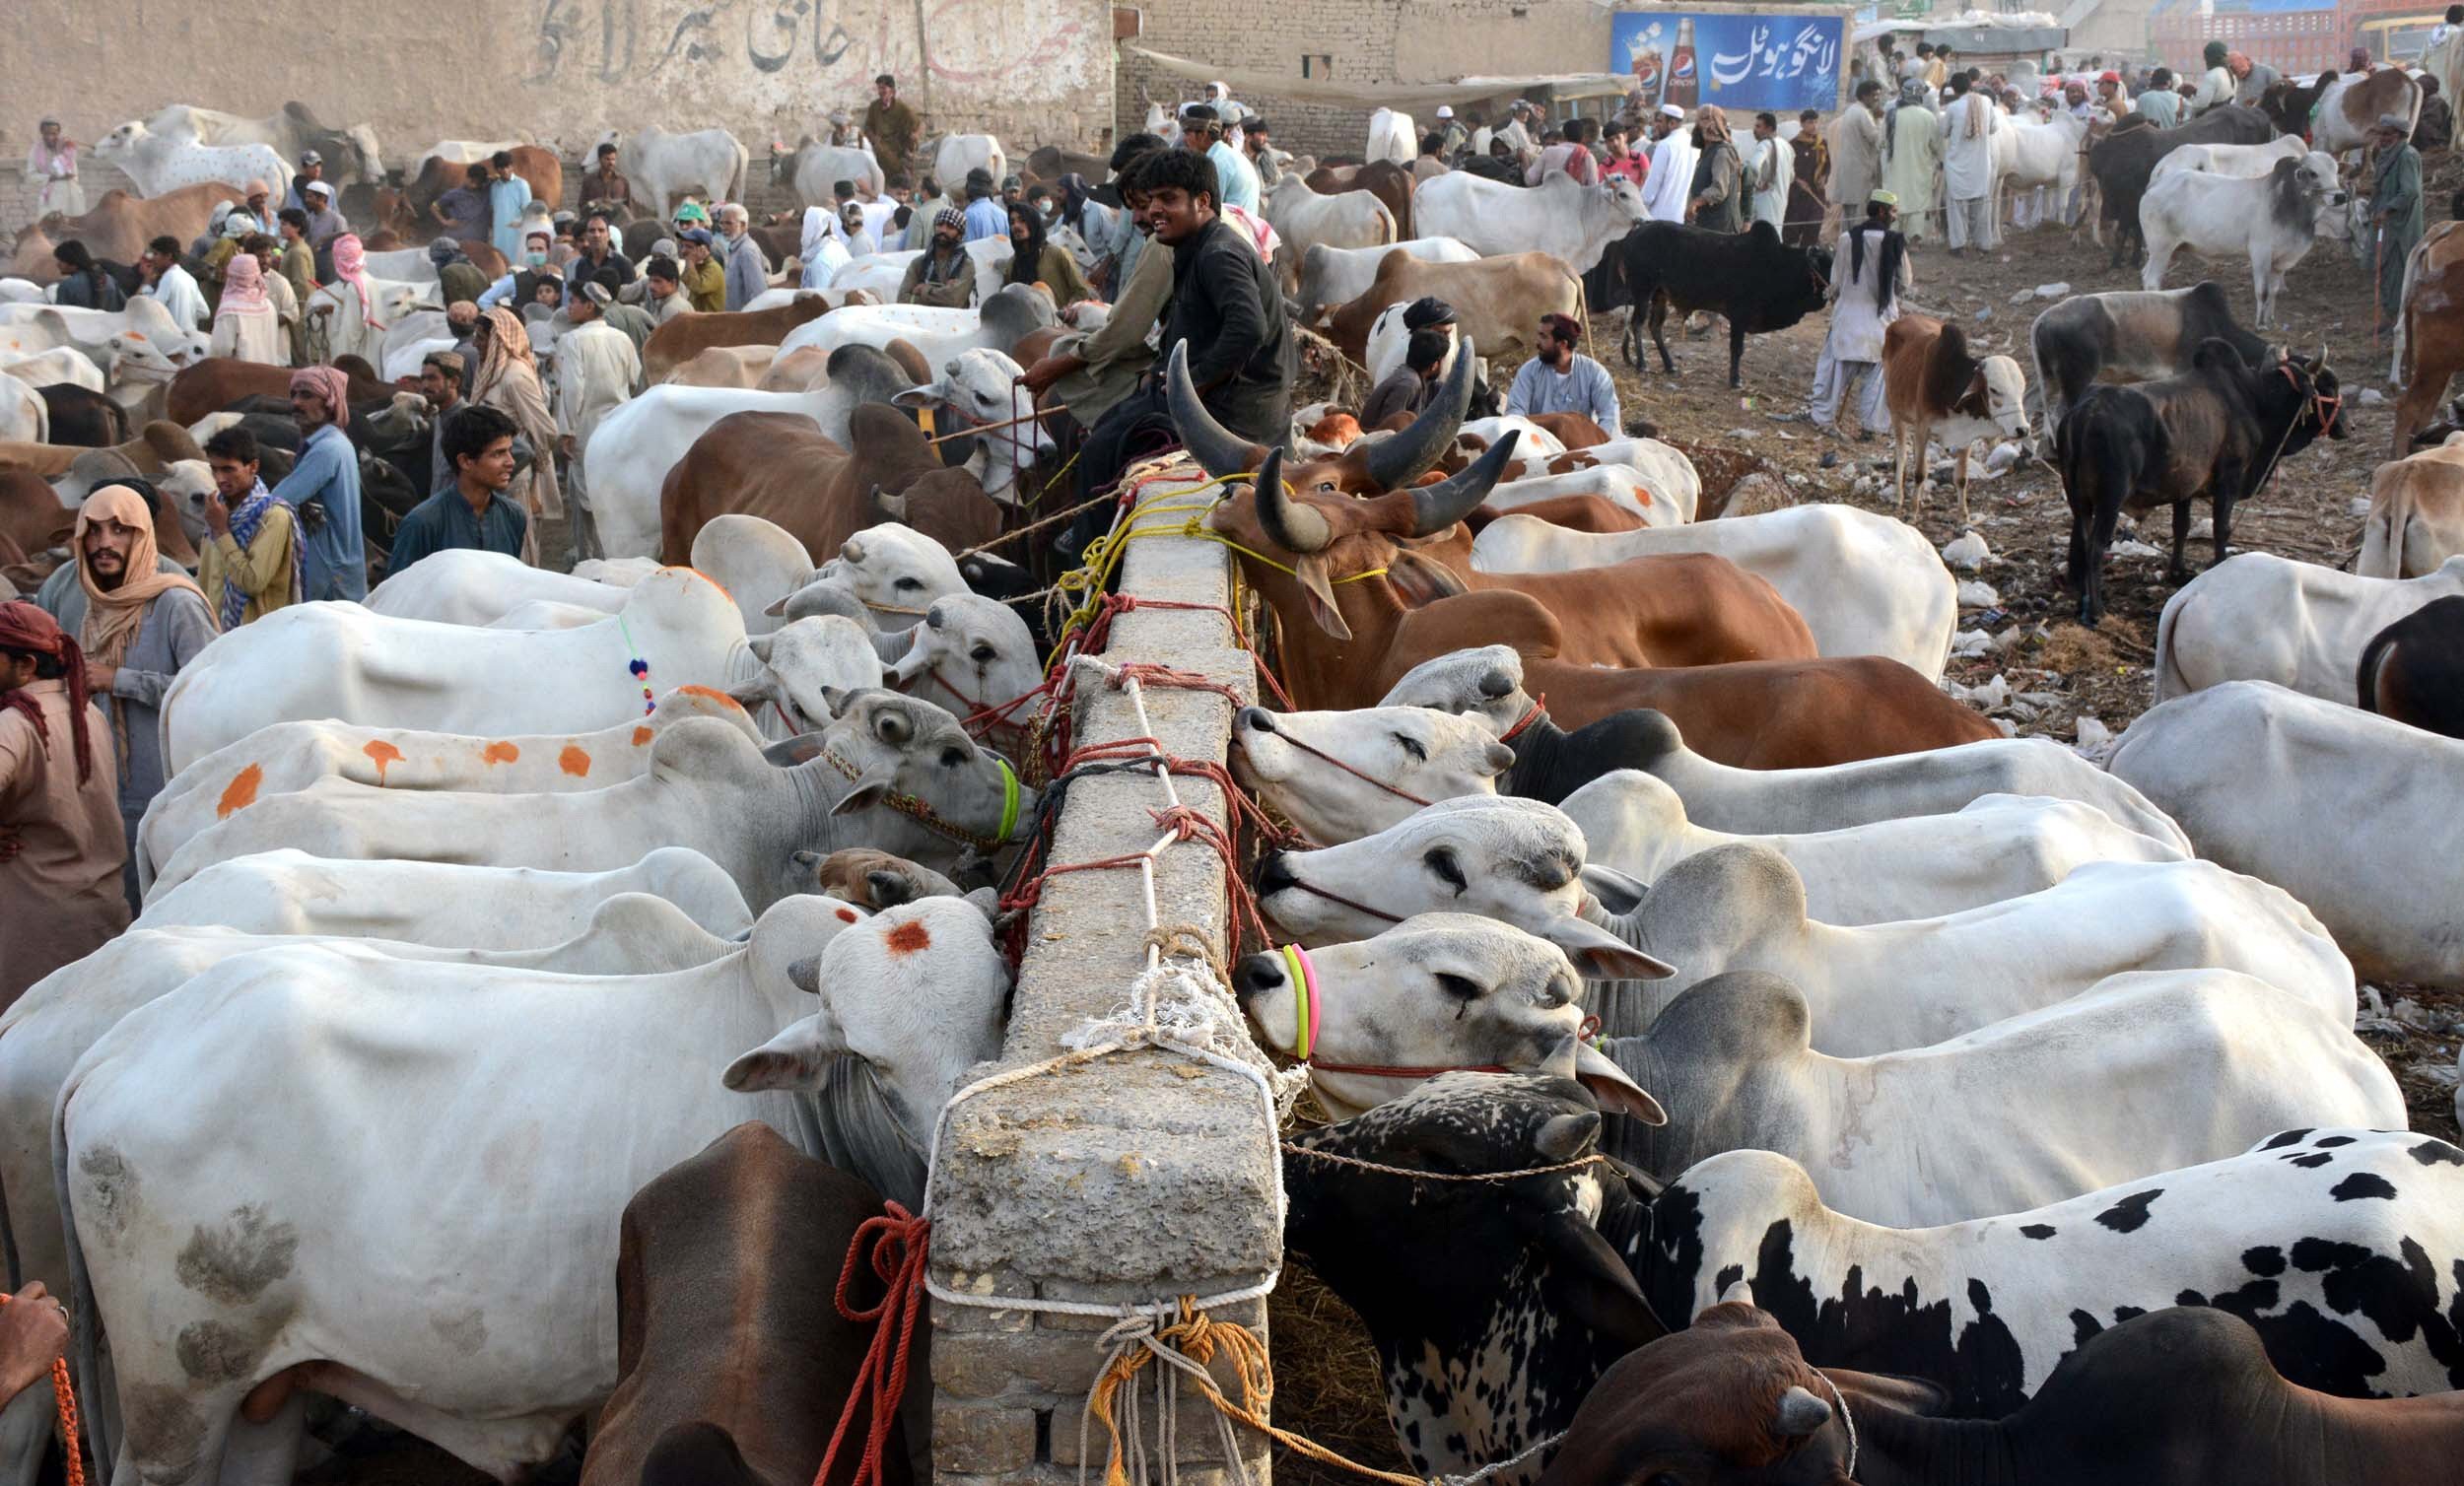 the aim behind establishing livestock markets is to eliminate the role of brokers and facilitate the livestock keepers directly jaffar says photo express